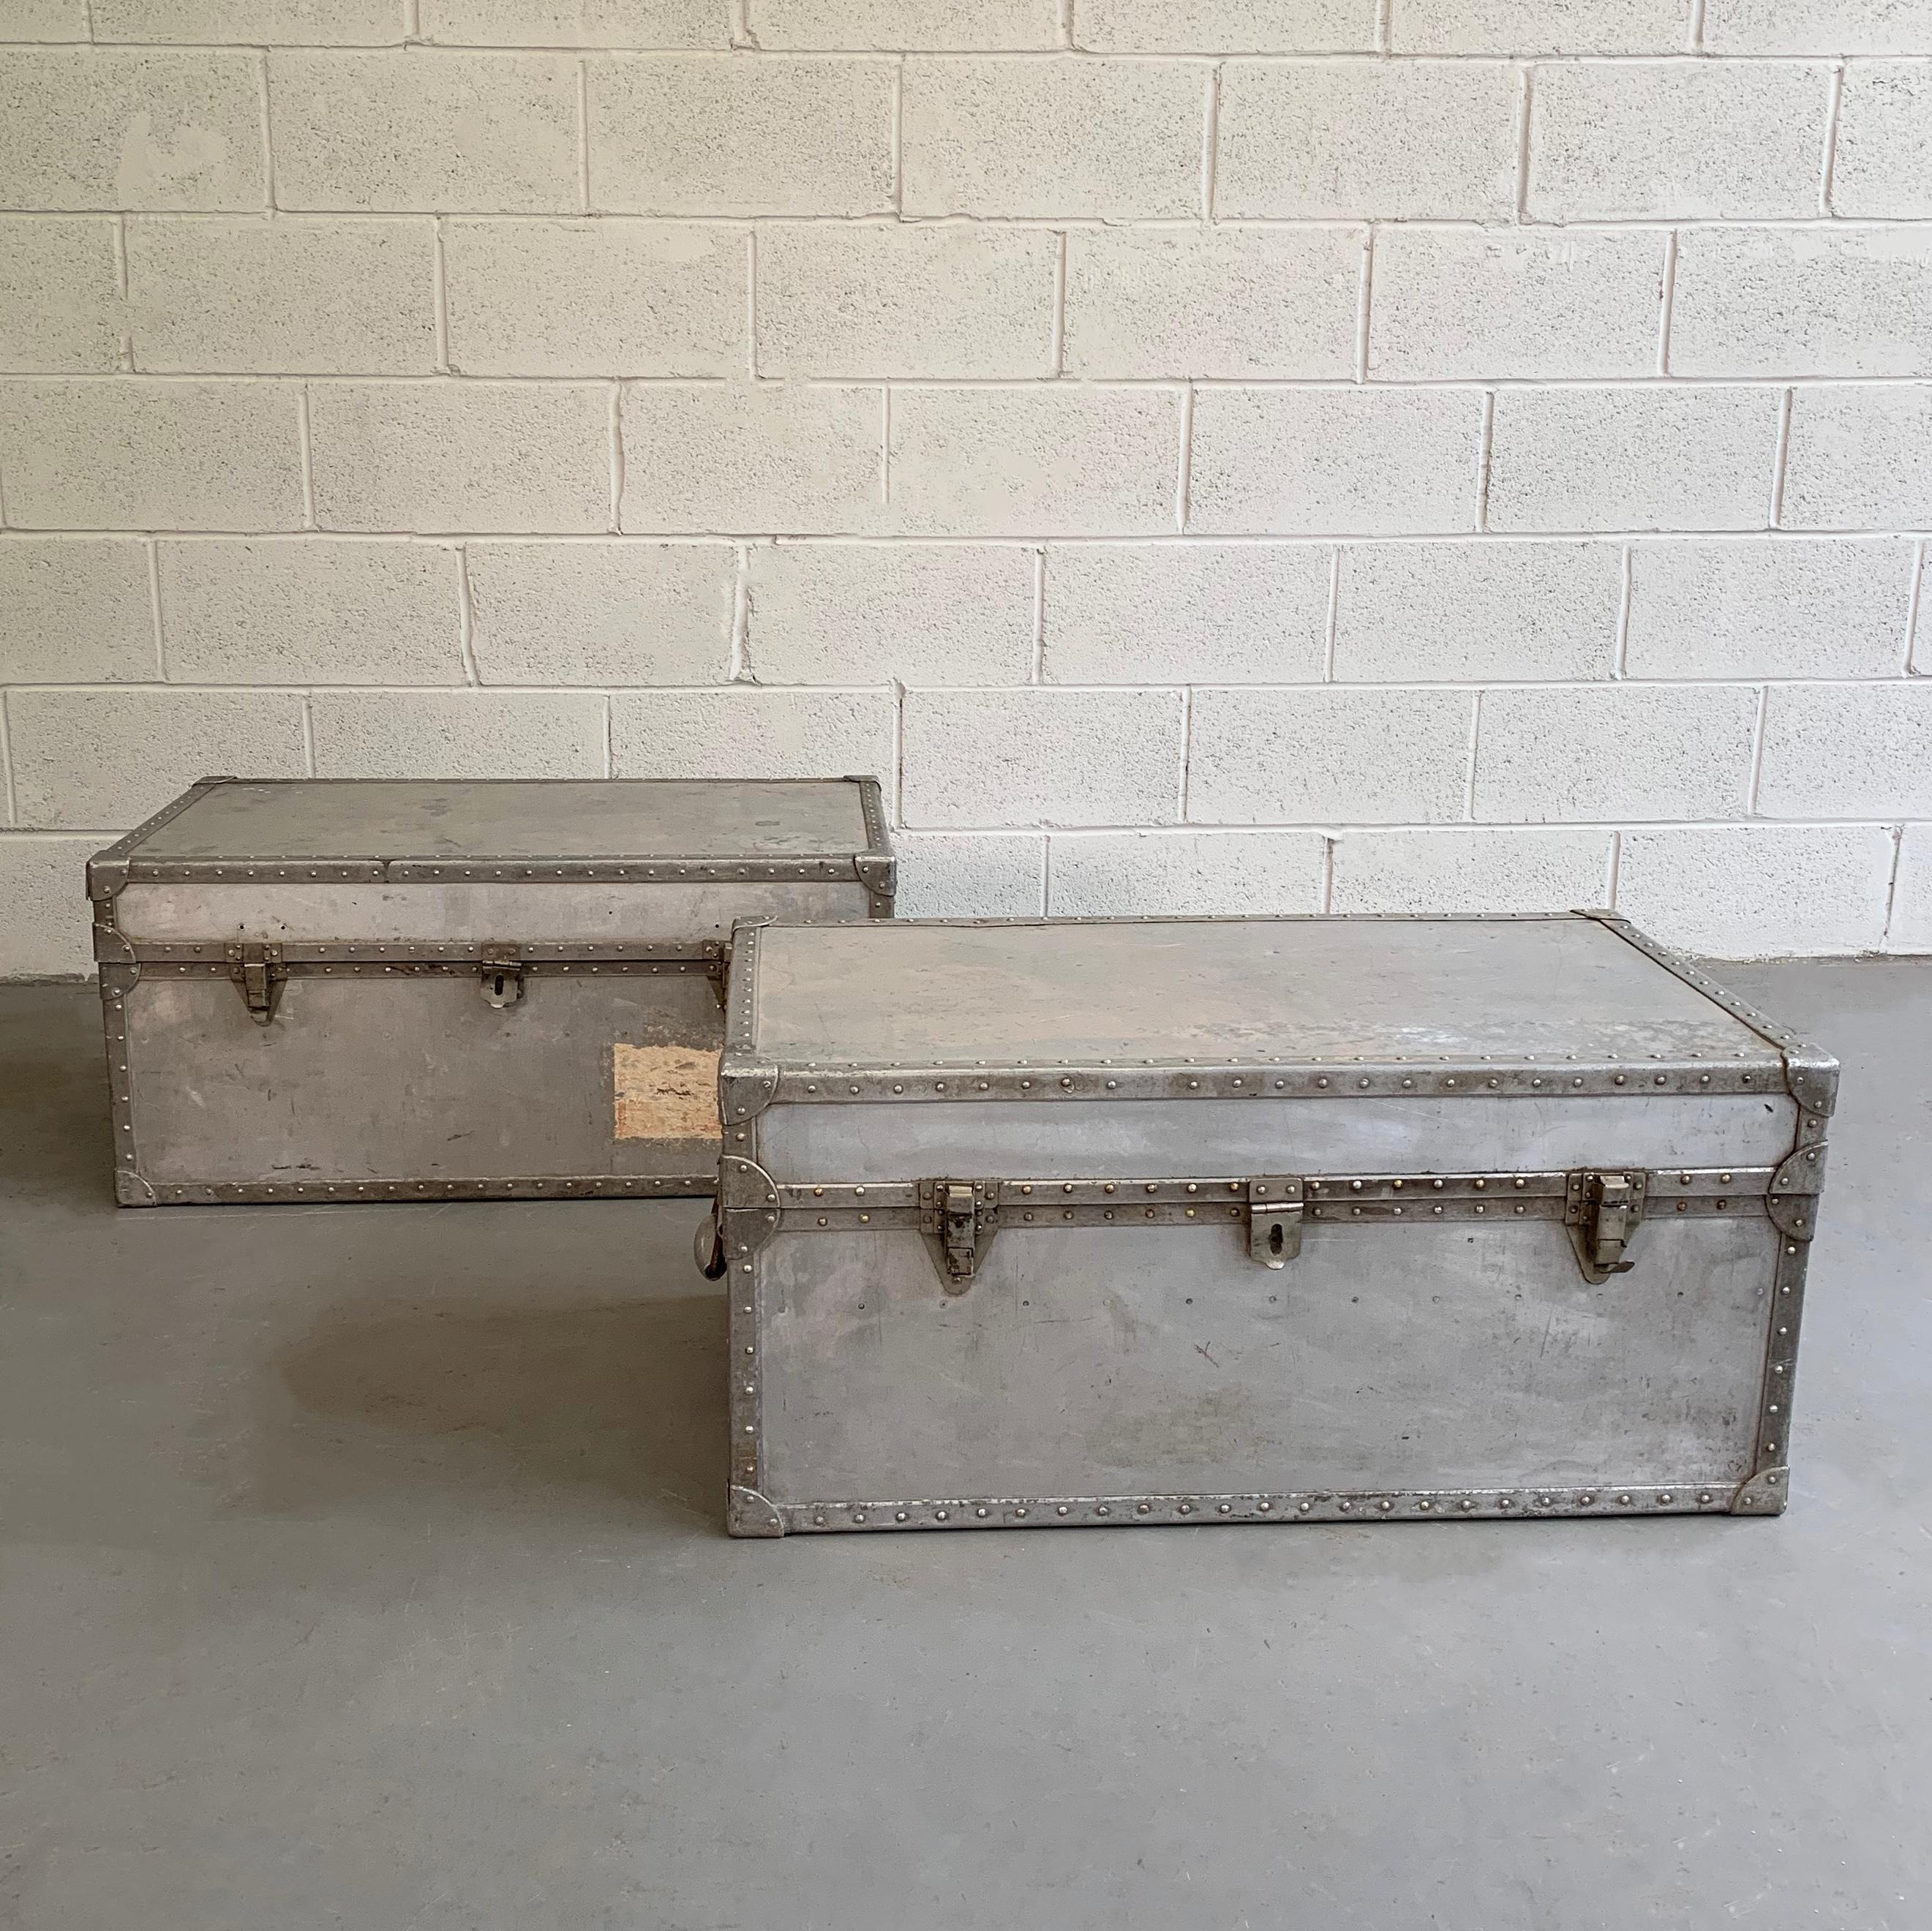 Pair of Industrial, aluminum, military trunks feature riveted edges, aluminum handles and original cargo stamps and stickers. One trunk includes a green tray insert.